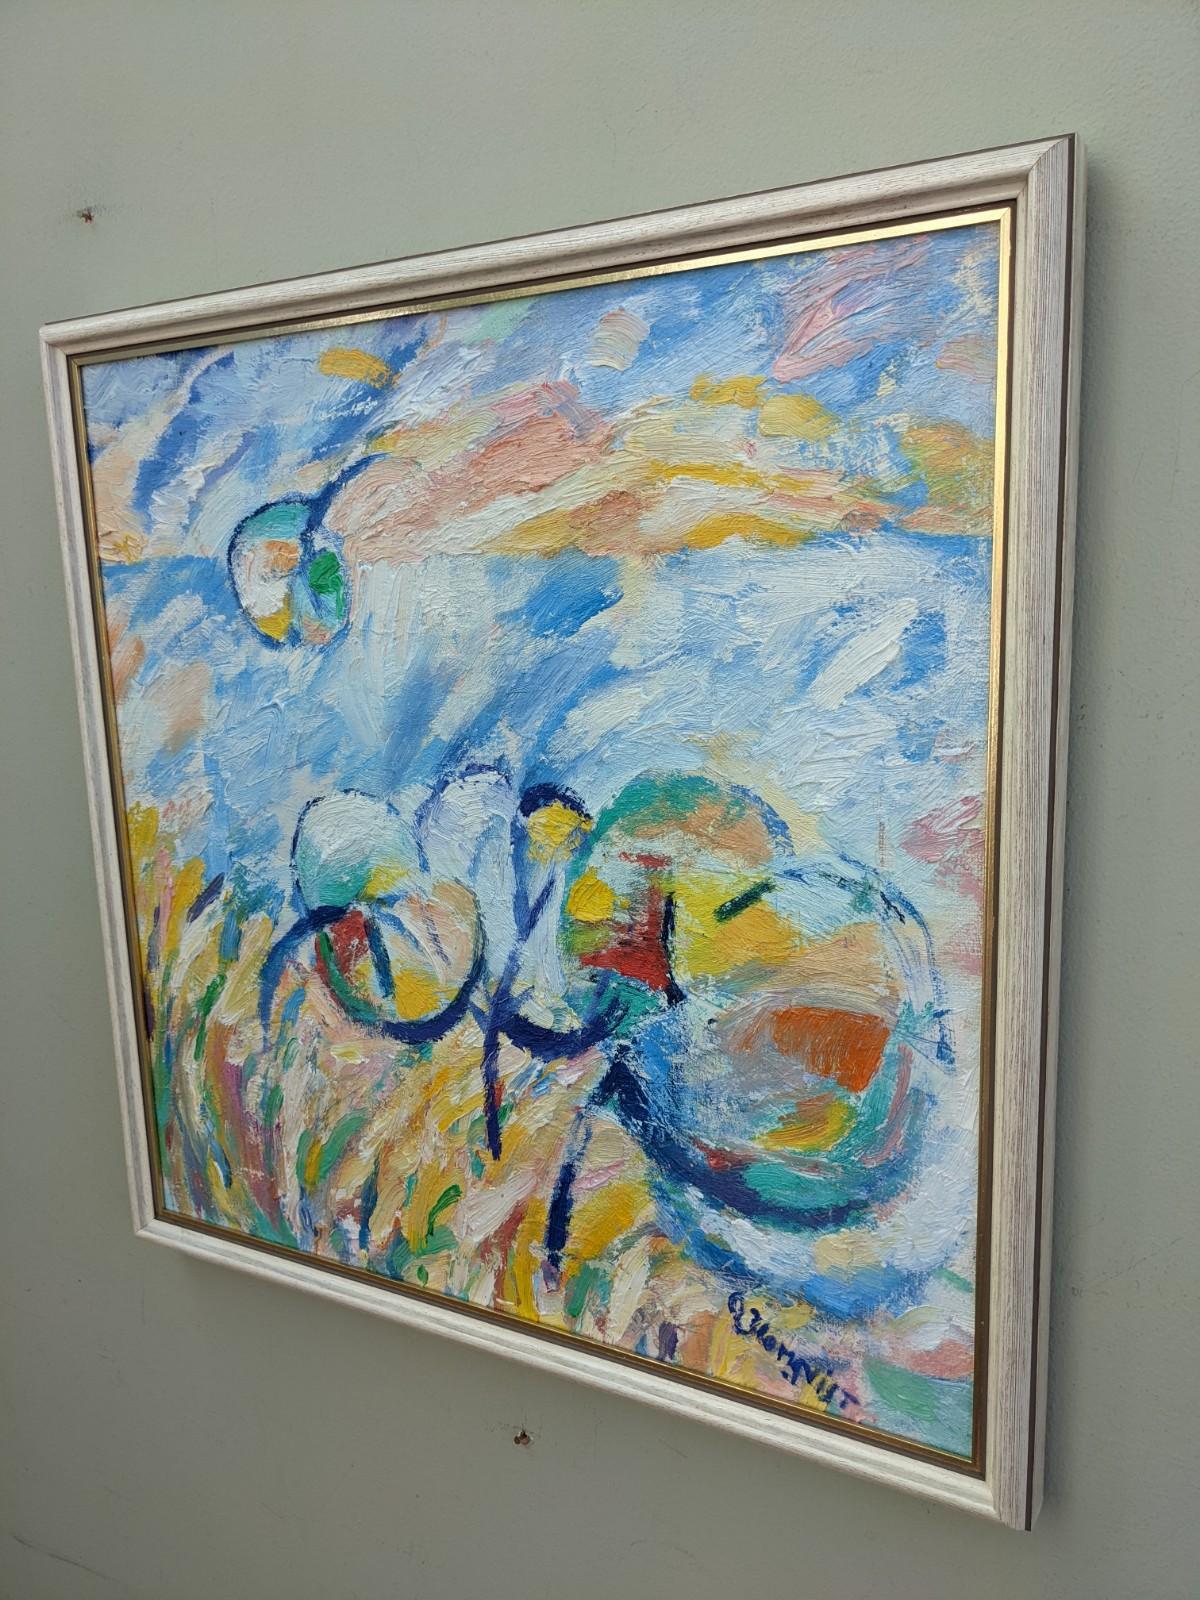 1993 Modern Post-Impressionist Framed Abstract Oil Painting - 